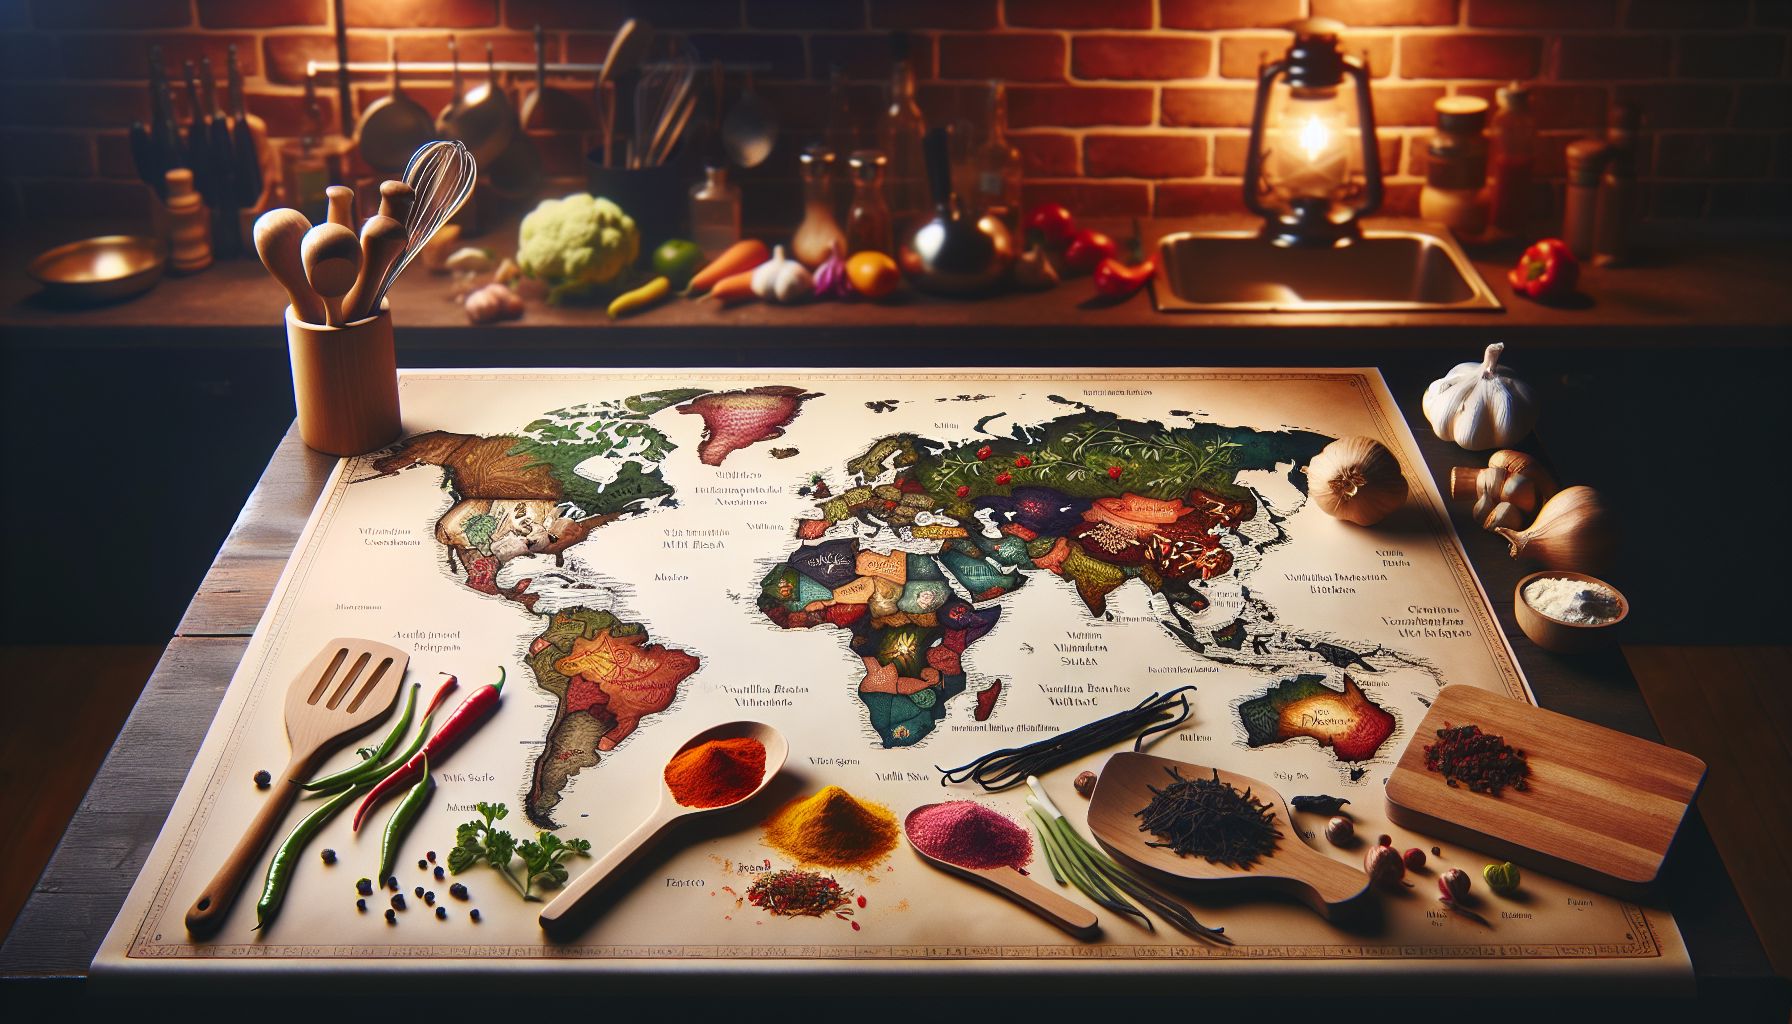 Let the Flavors of the World Guide Your Cooking Adventures